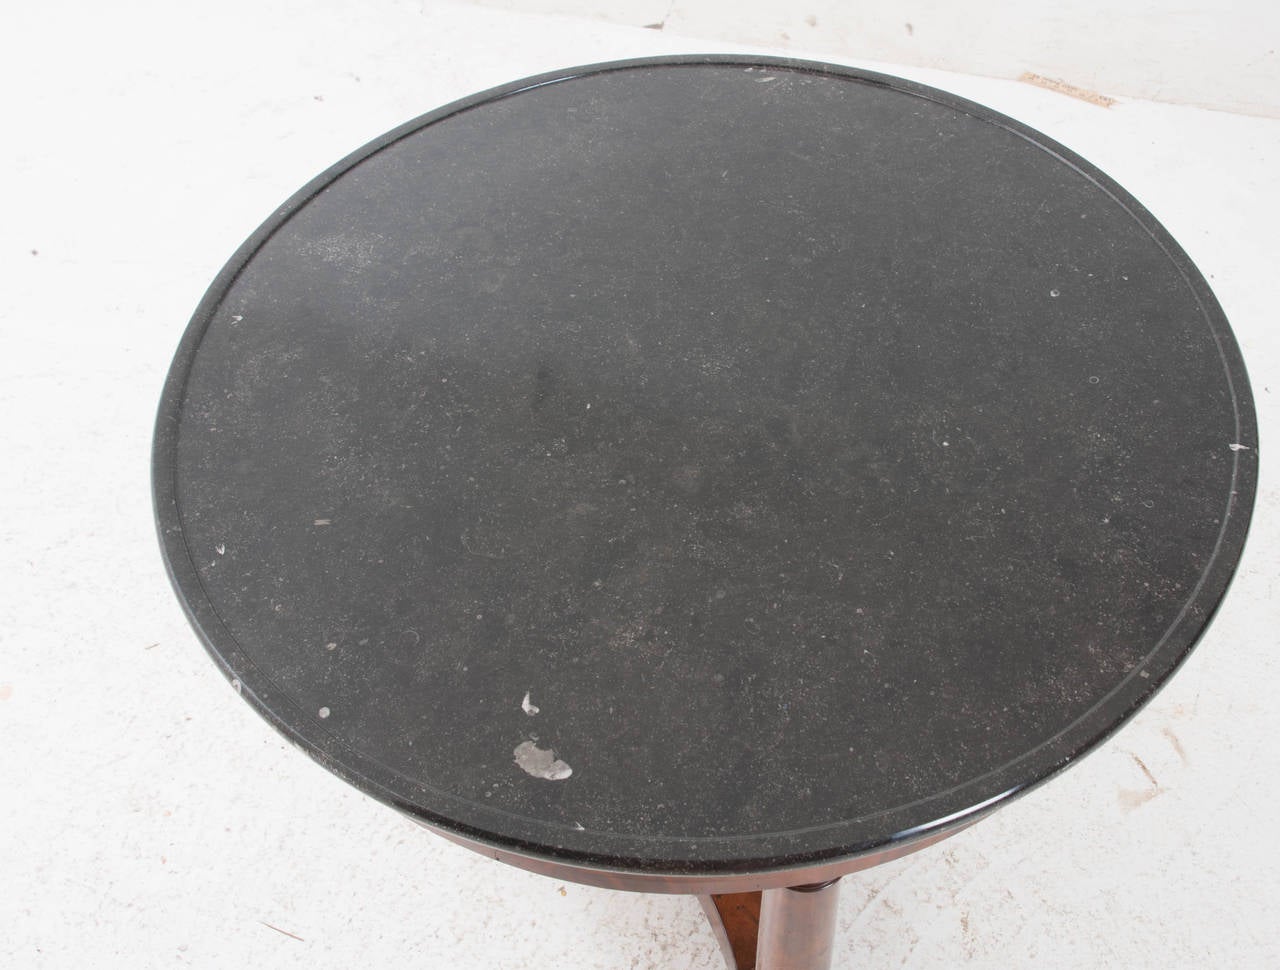 A gorgeous round Empire center table with its original black fossil marble top over a flame mahogany apron over three column legs and ending with a shaped stretcher base and metal casters. Make sure to go over the pictures carefully, the veneering